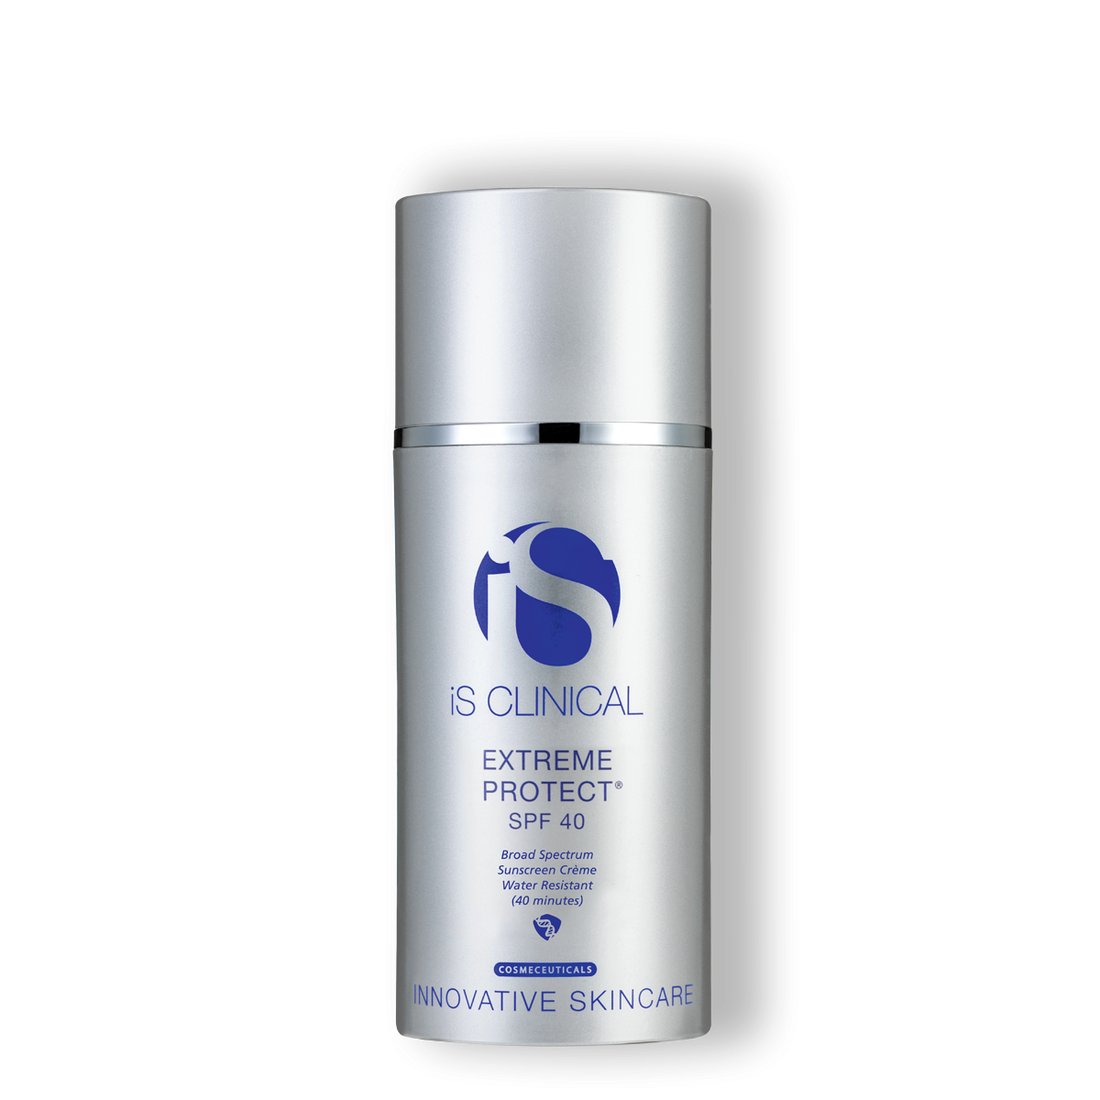 iS Clinical Extreme Protect SPF 40 - best known for being an RESTORATIVE, ALL-PHYSICAL SUNSCREEN with ULTIMATE PROTECTION.